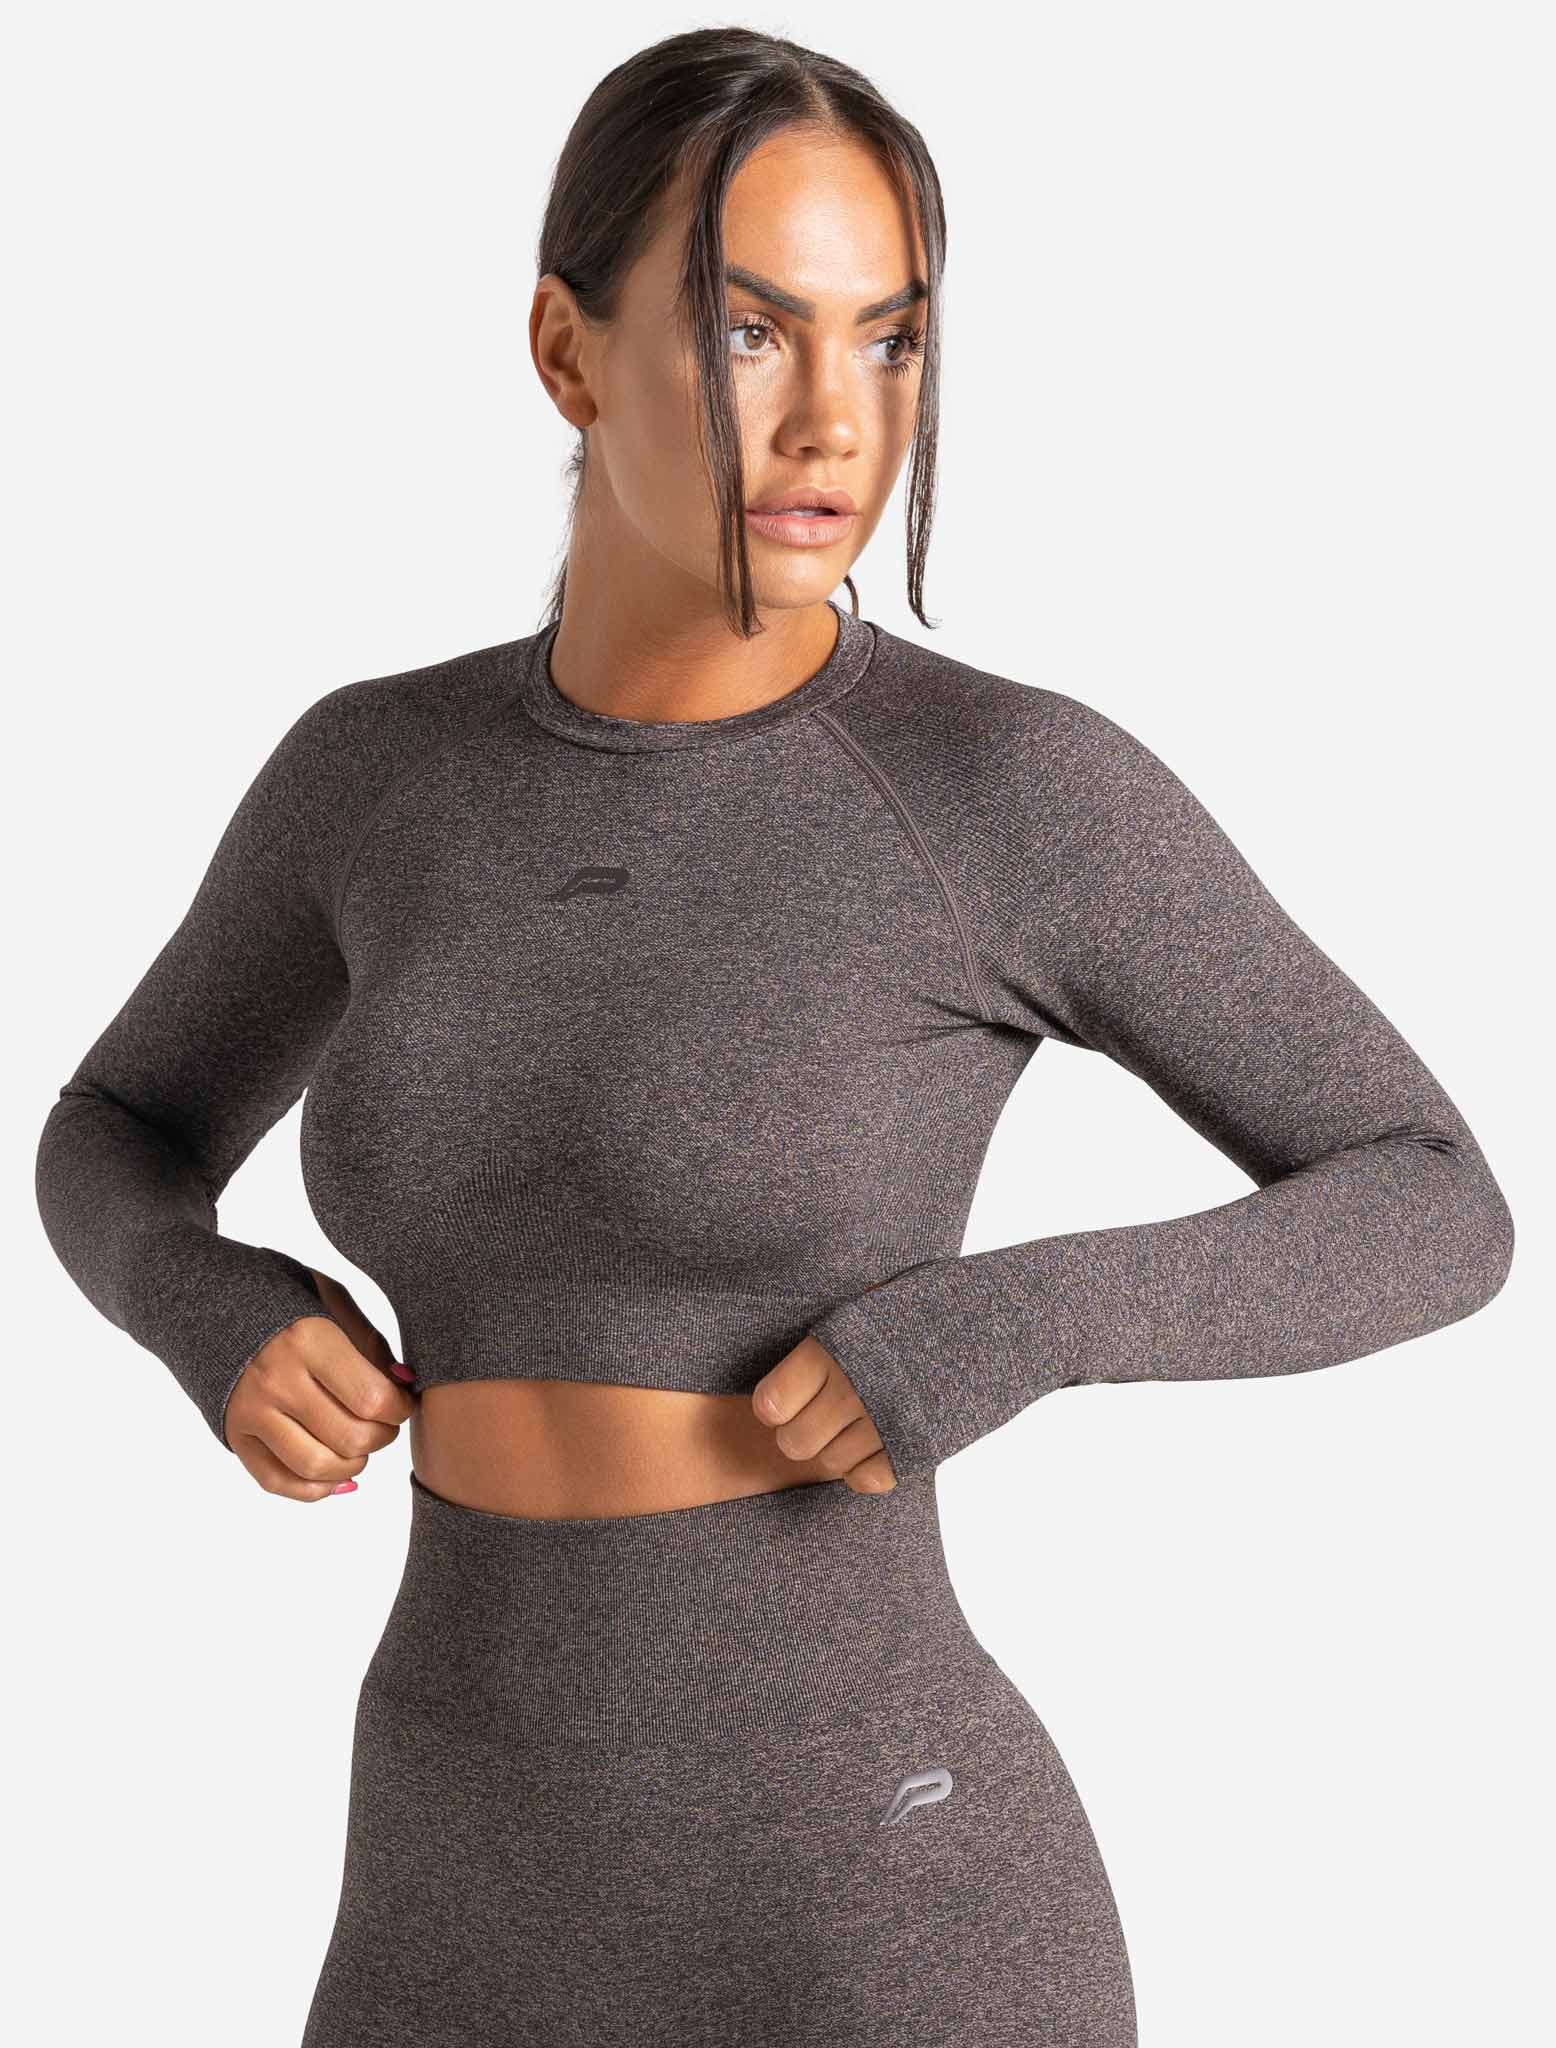 Core Seamless Long Sleeve Crop Top / Brown Marl Pursue Fitness 2